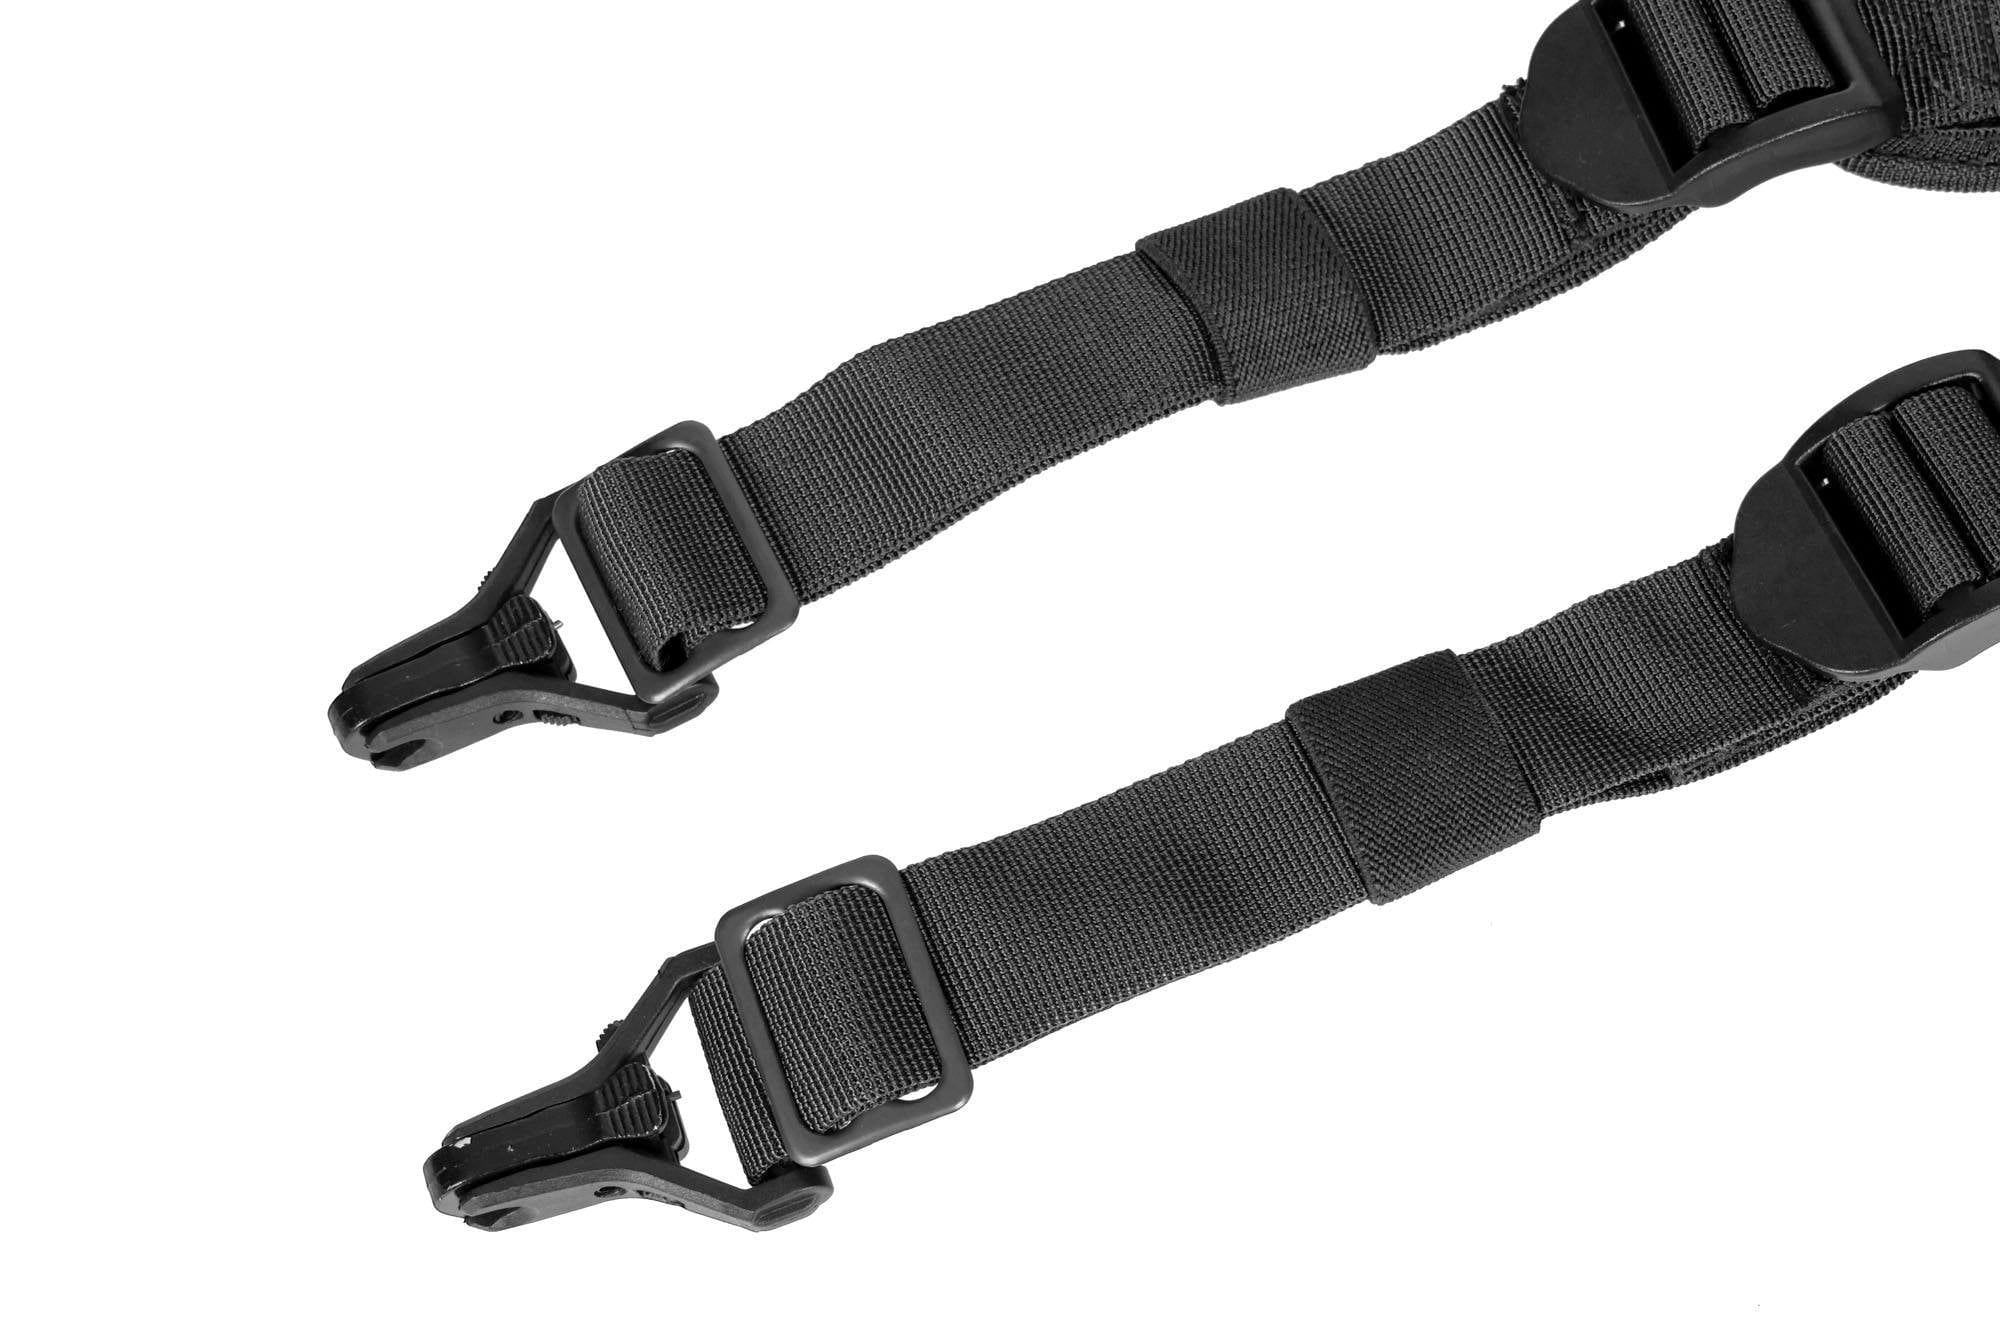 4-point LH tactical harness - black